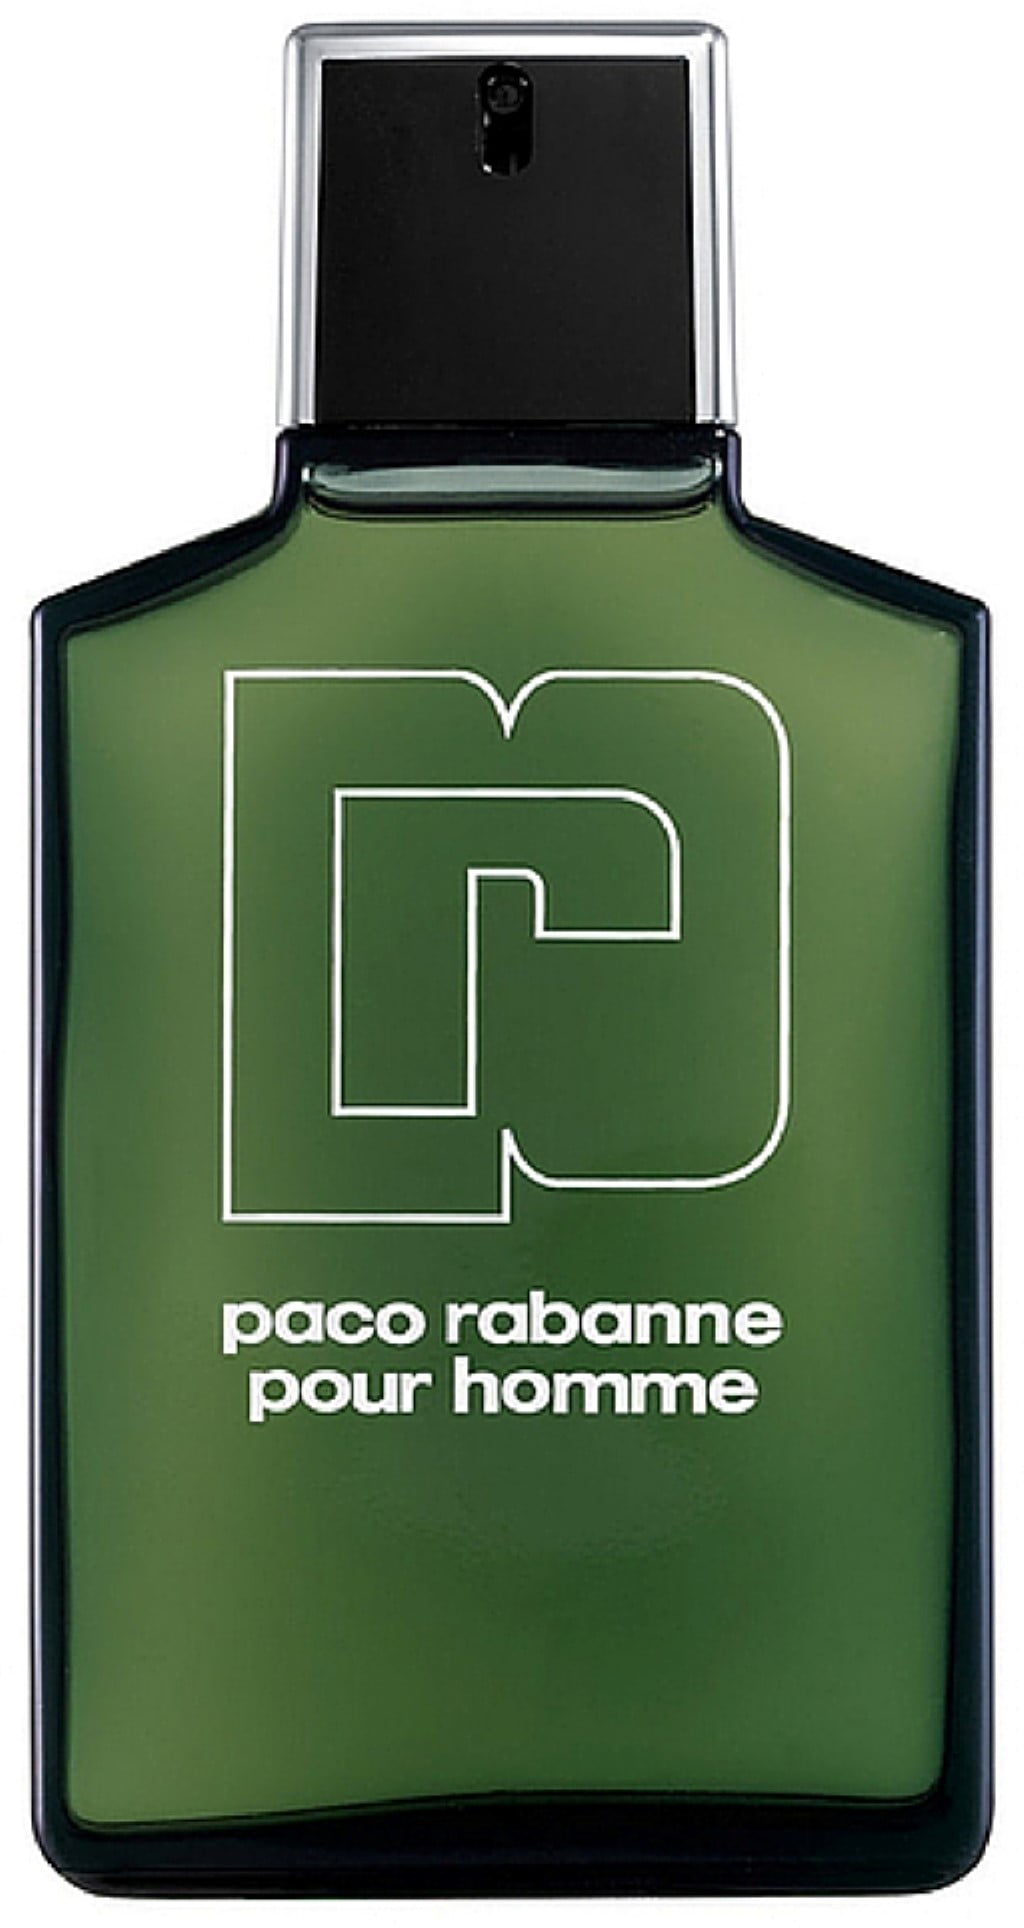 Paco pour homme. Paco Rabanne pour homme 100 мл. Paco Rabanne pour homme men 30ml EDT Tester. Paco Rabanne Paco мужские духи. Paco Rabanne pour homme EDT.